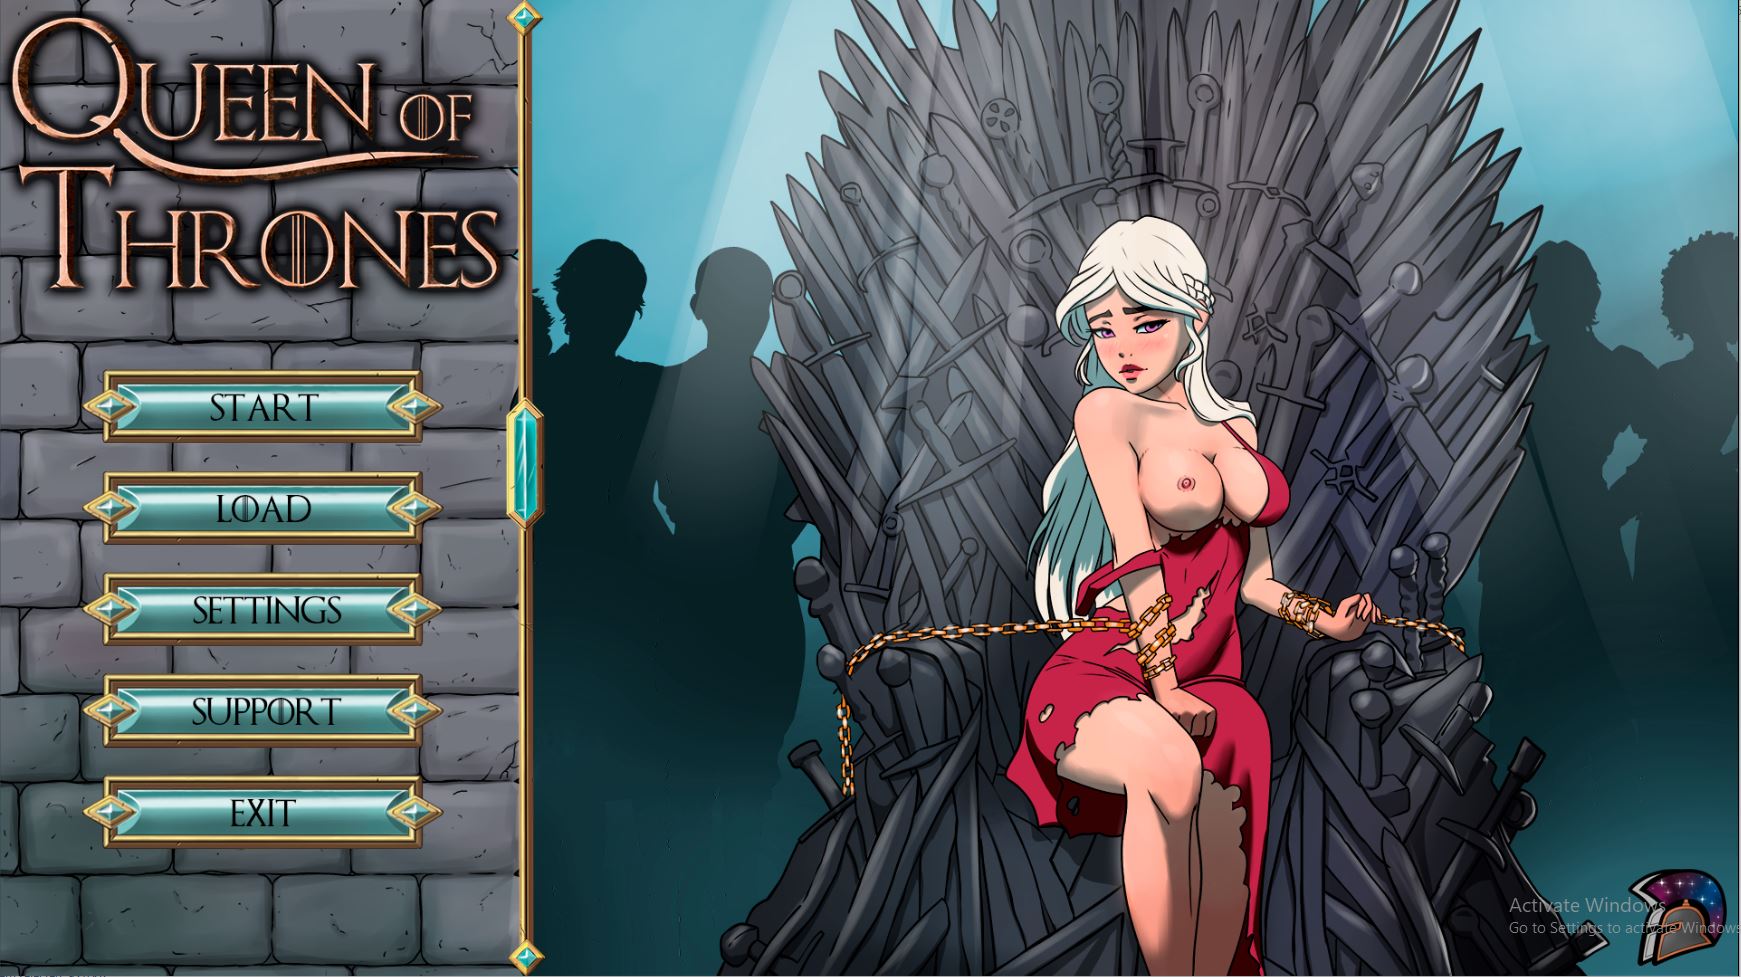 becci palmer recommends sex simulator game of thrones pic